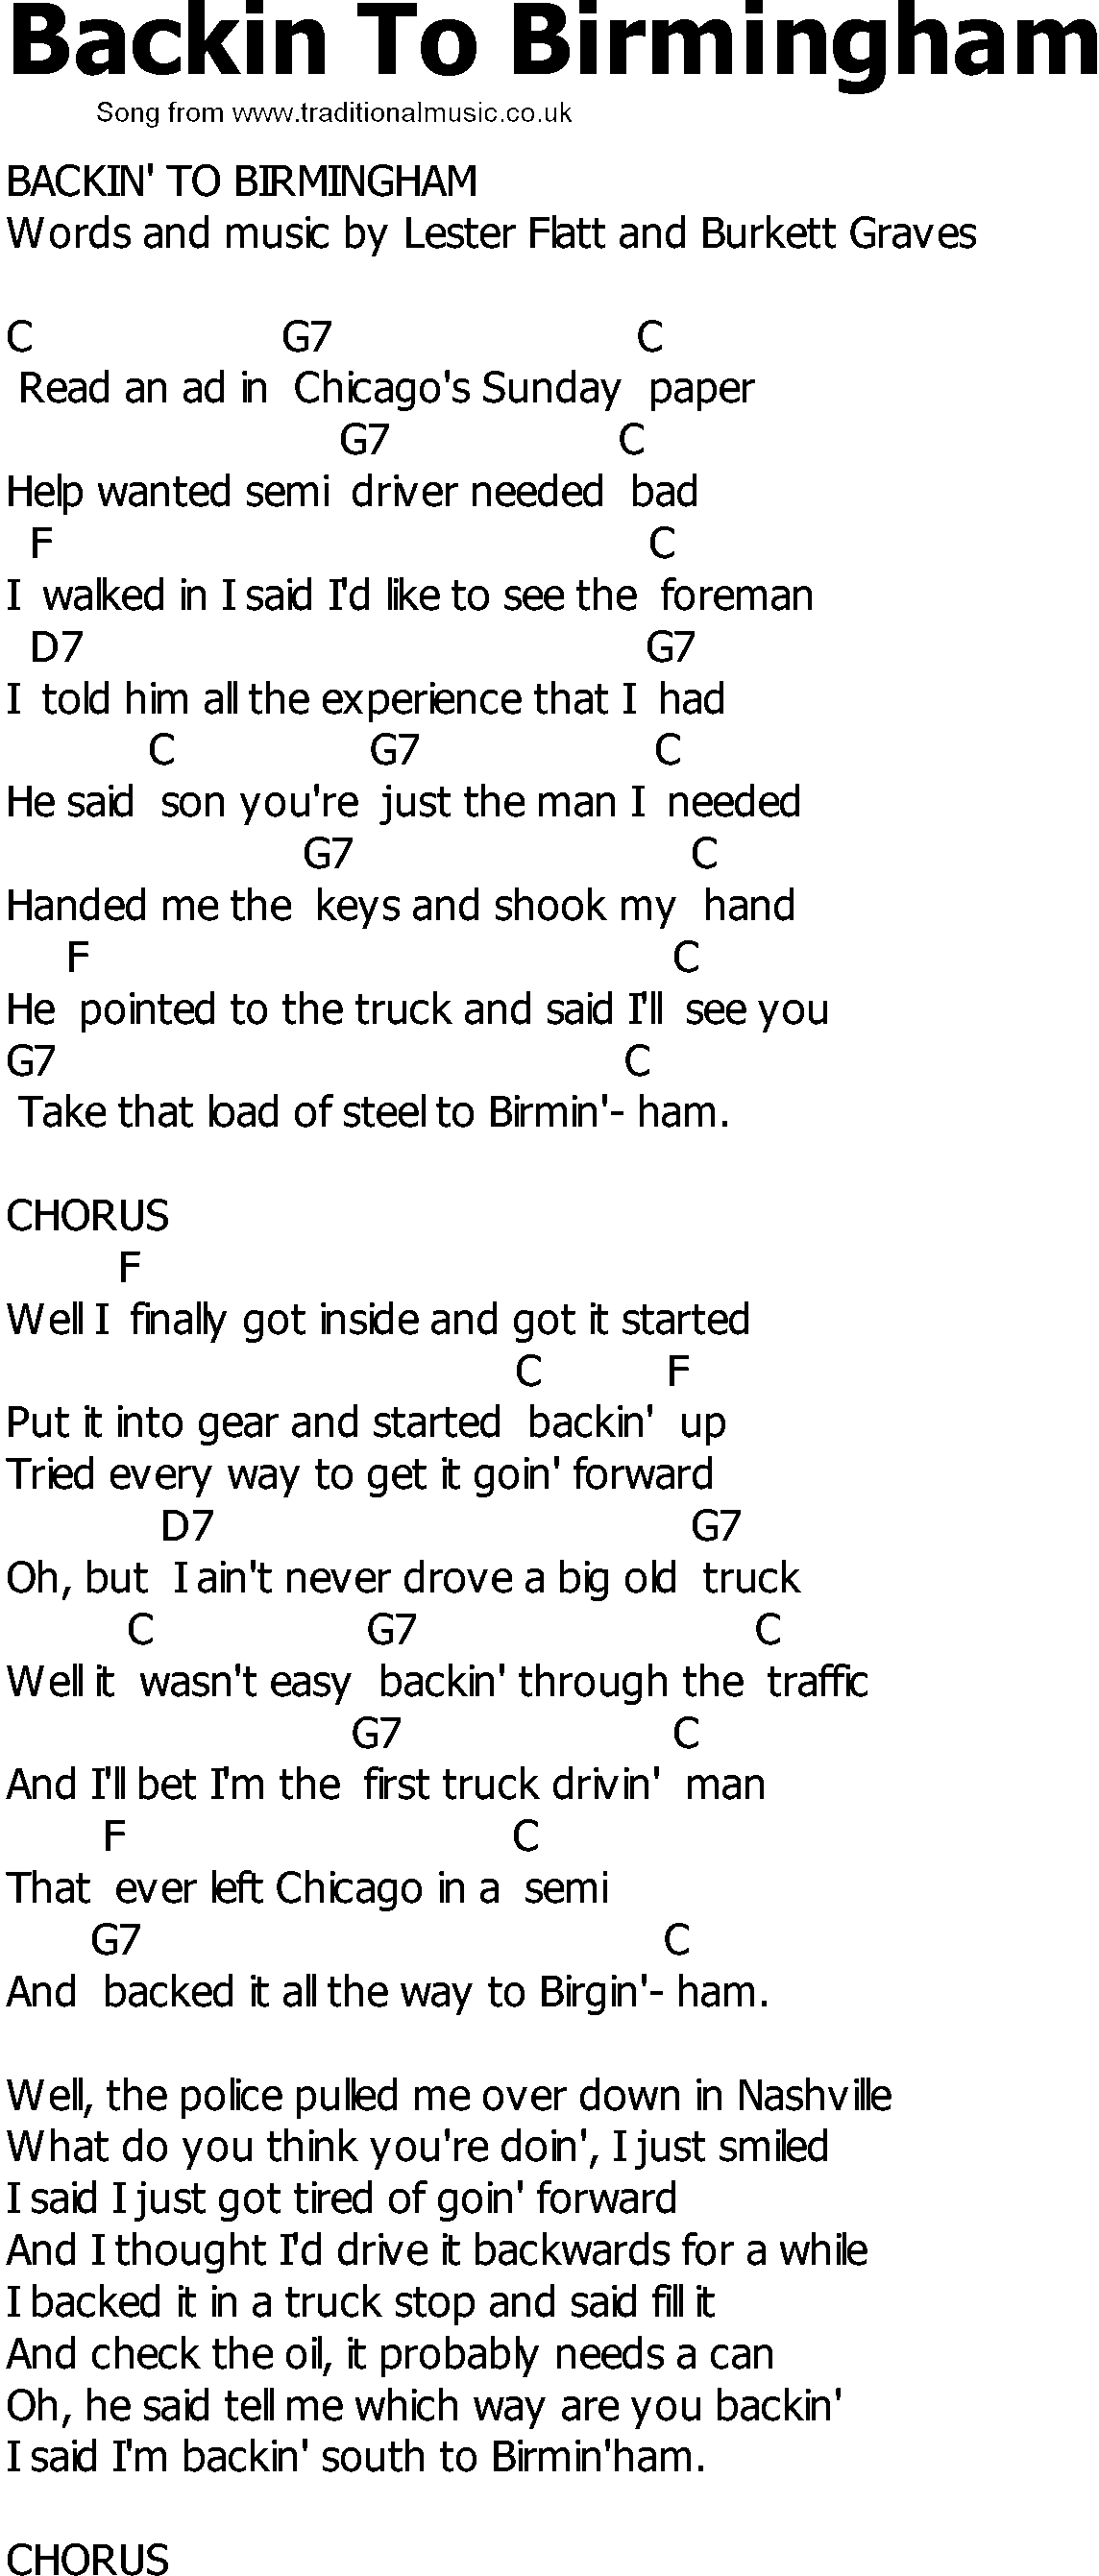 Old Country song lyrics with chords - Backin To Birmingham